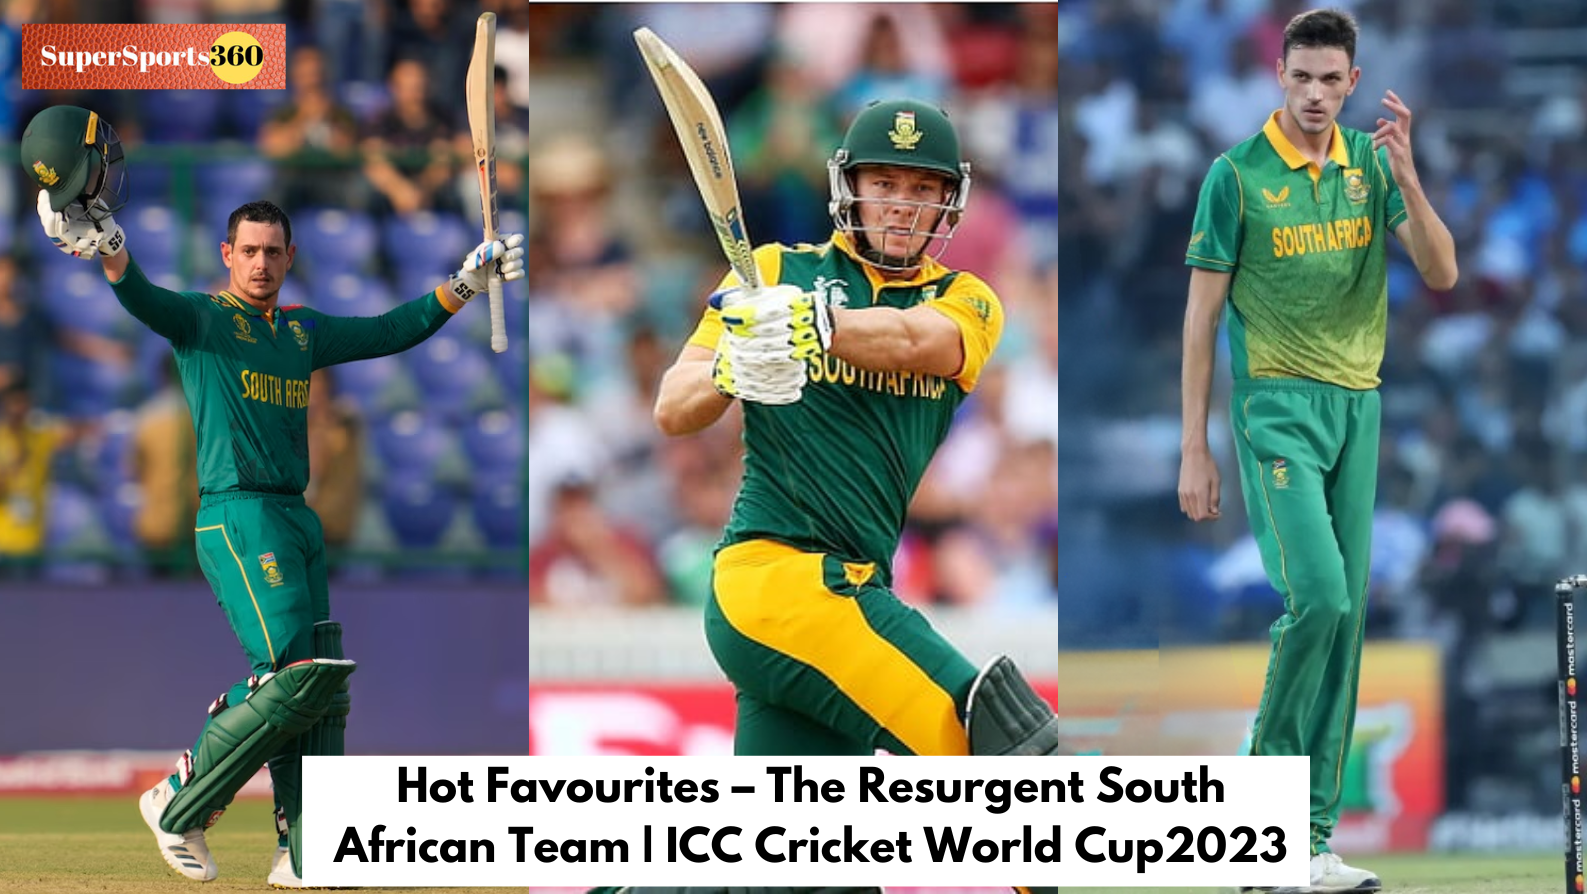 Hot Favourites – The Resurgent South African Team | ICC Cricket World Cup2023